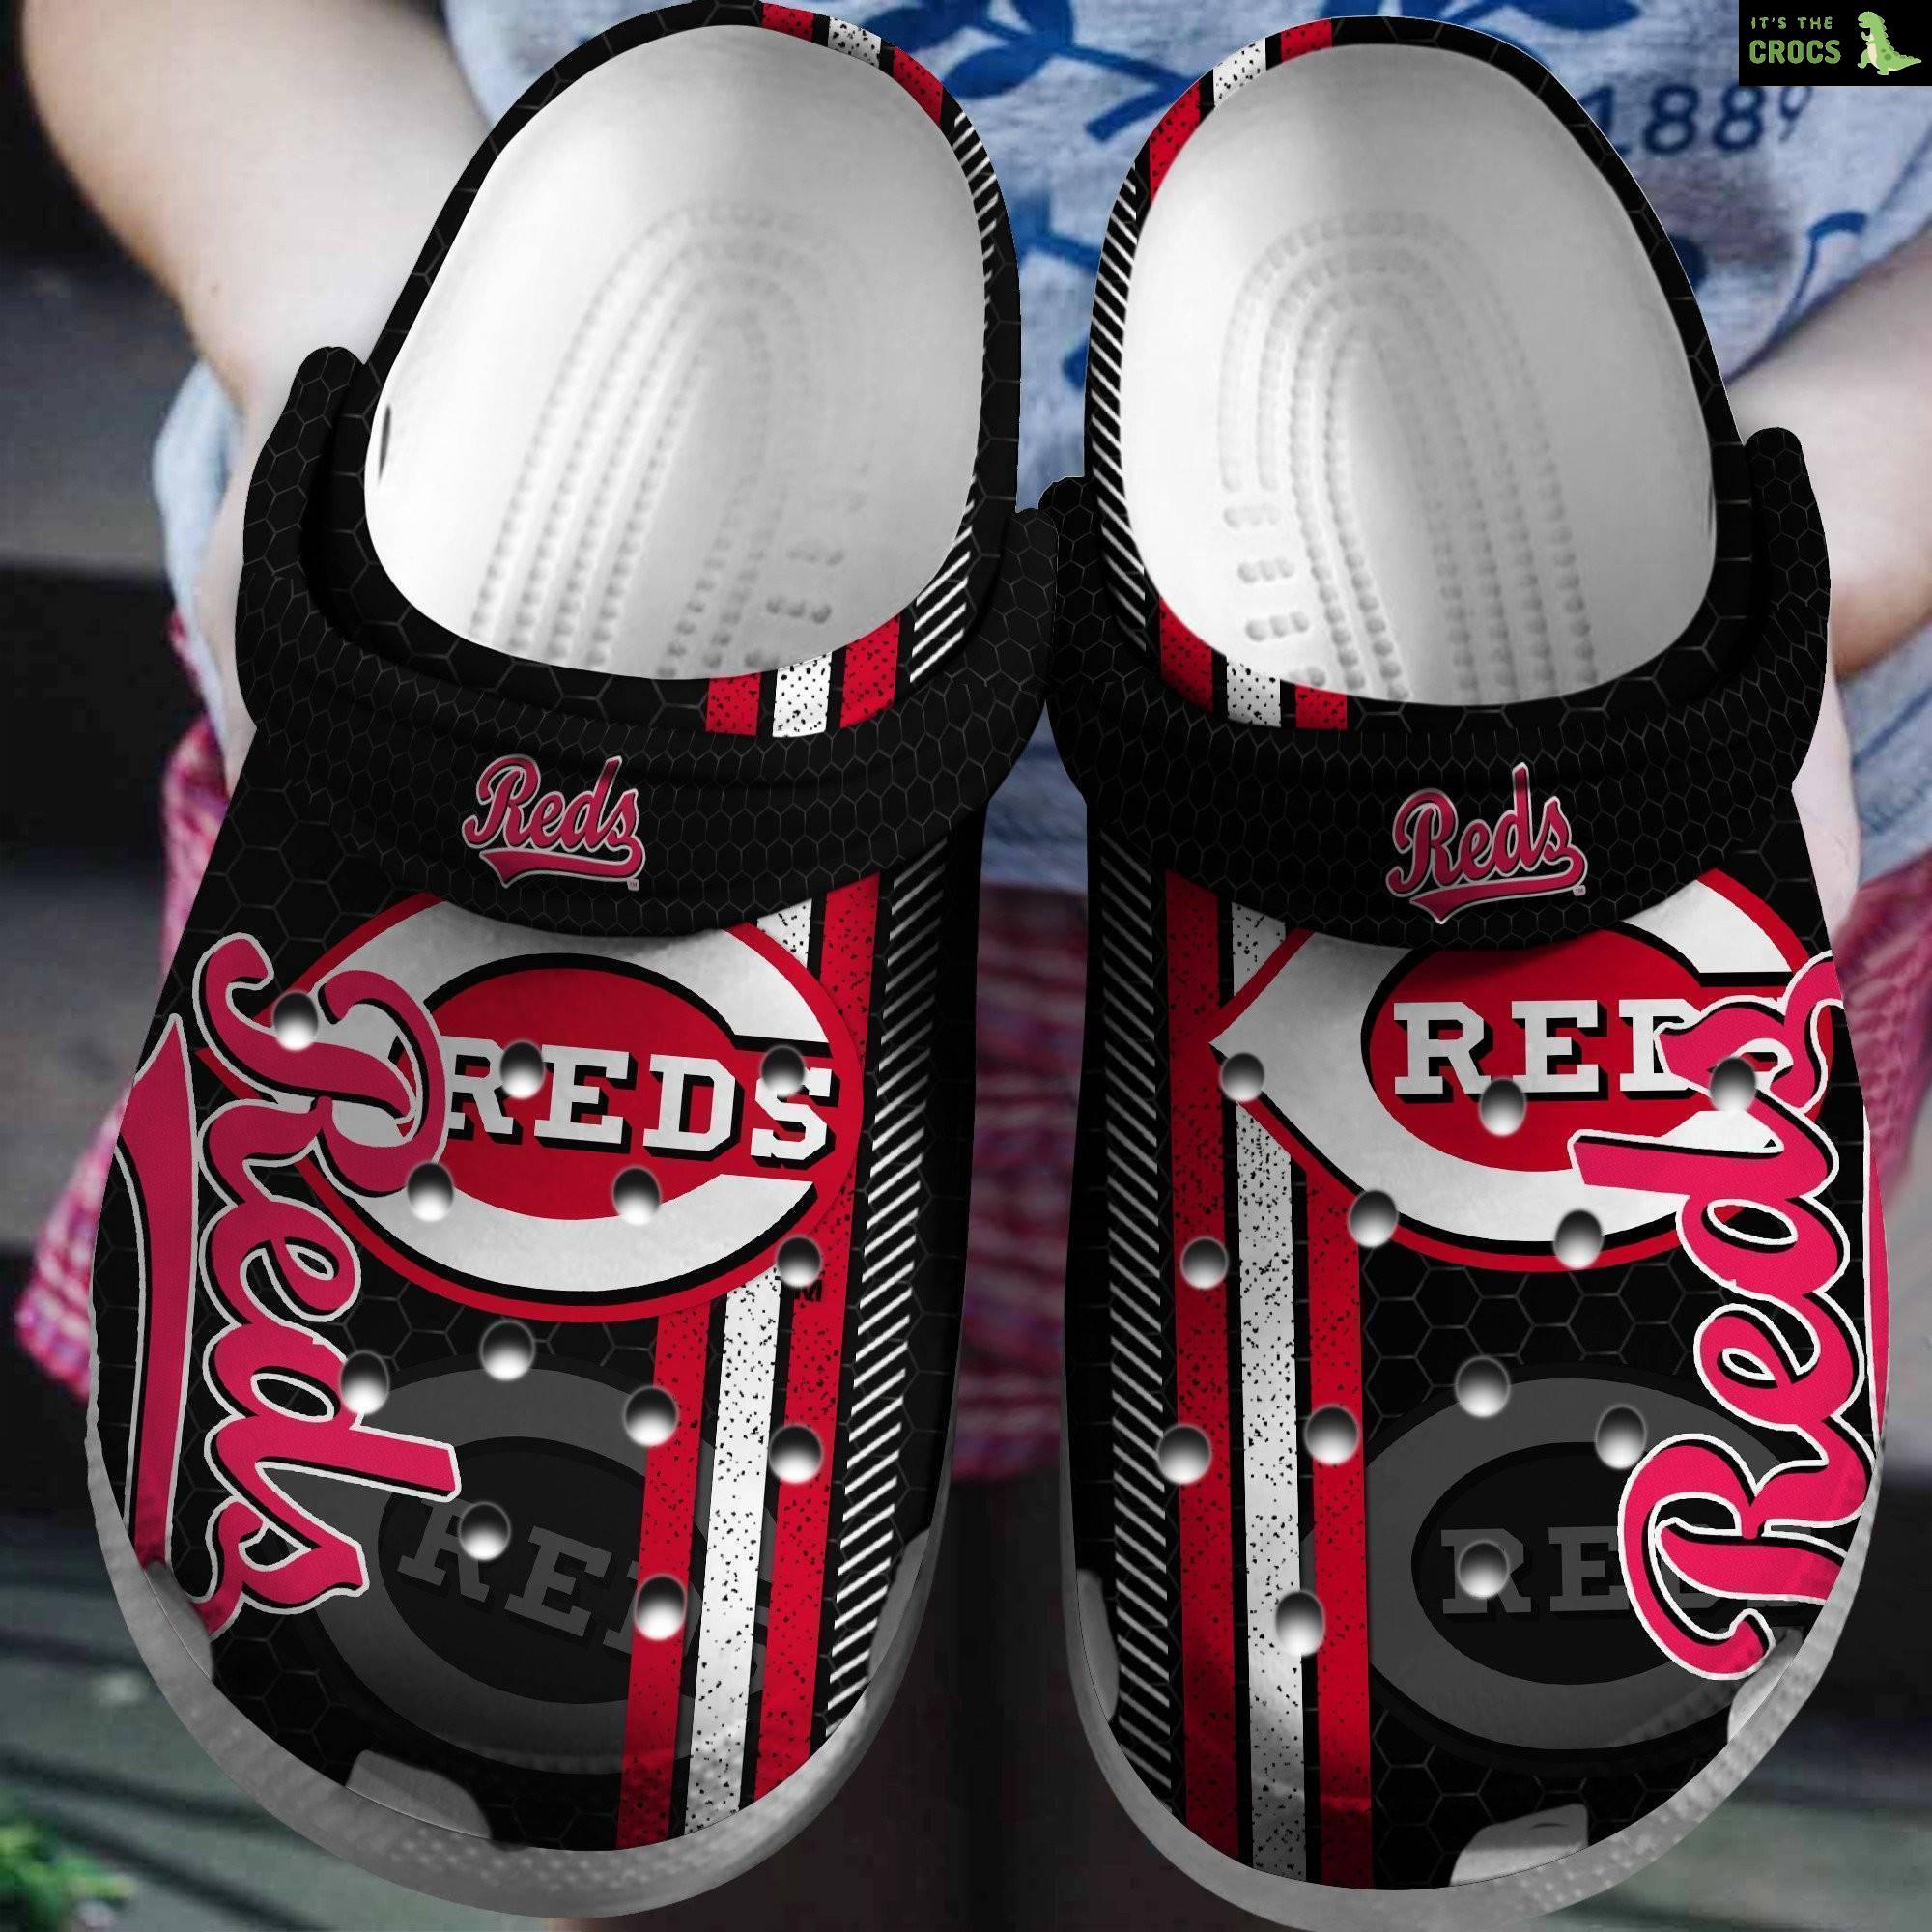 Hot Mlb Team Cincinnati Reds Crocs Clog Shoesshoes Trusted Shopping Online In The World